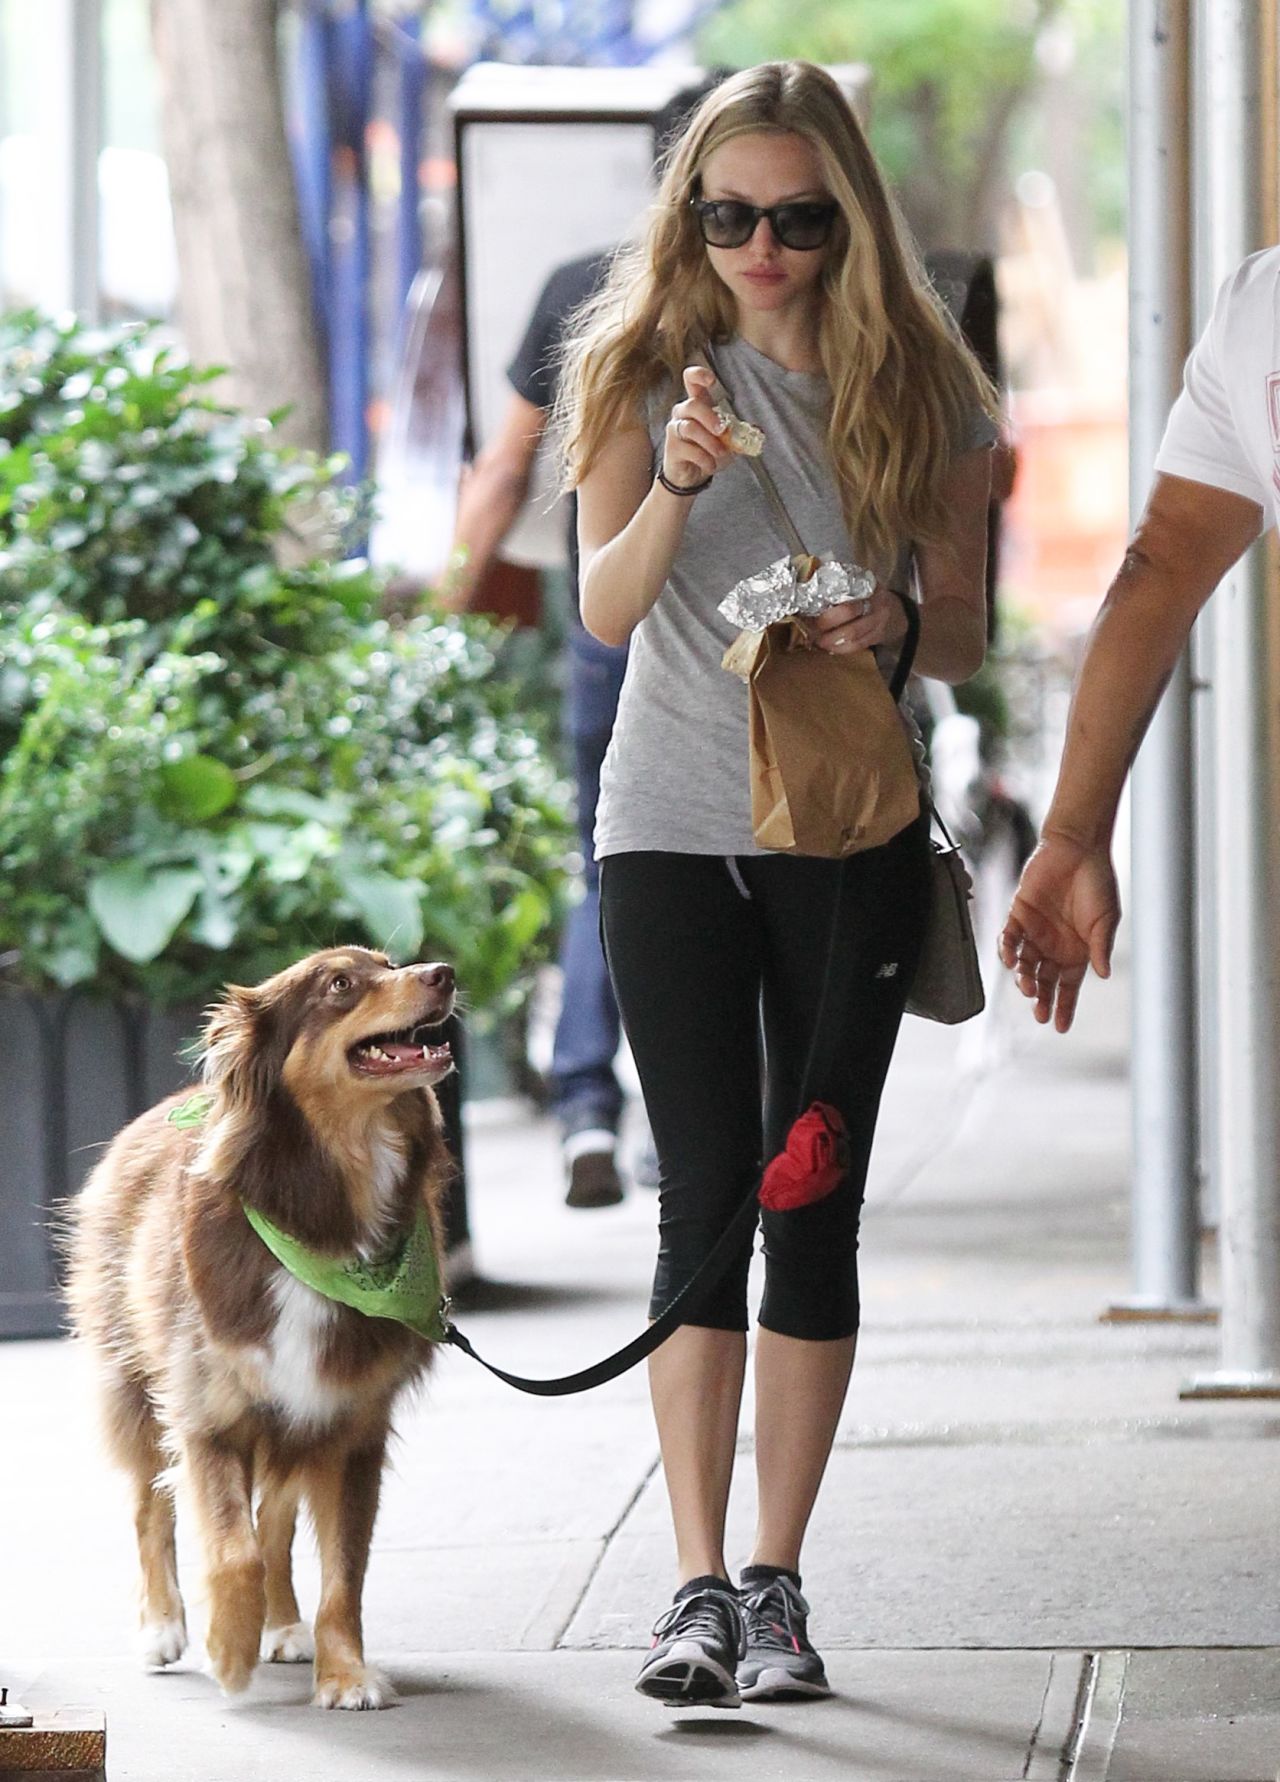 Amanda Seyfried and her dog take a walk in New York City on September 10.